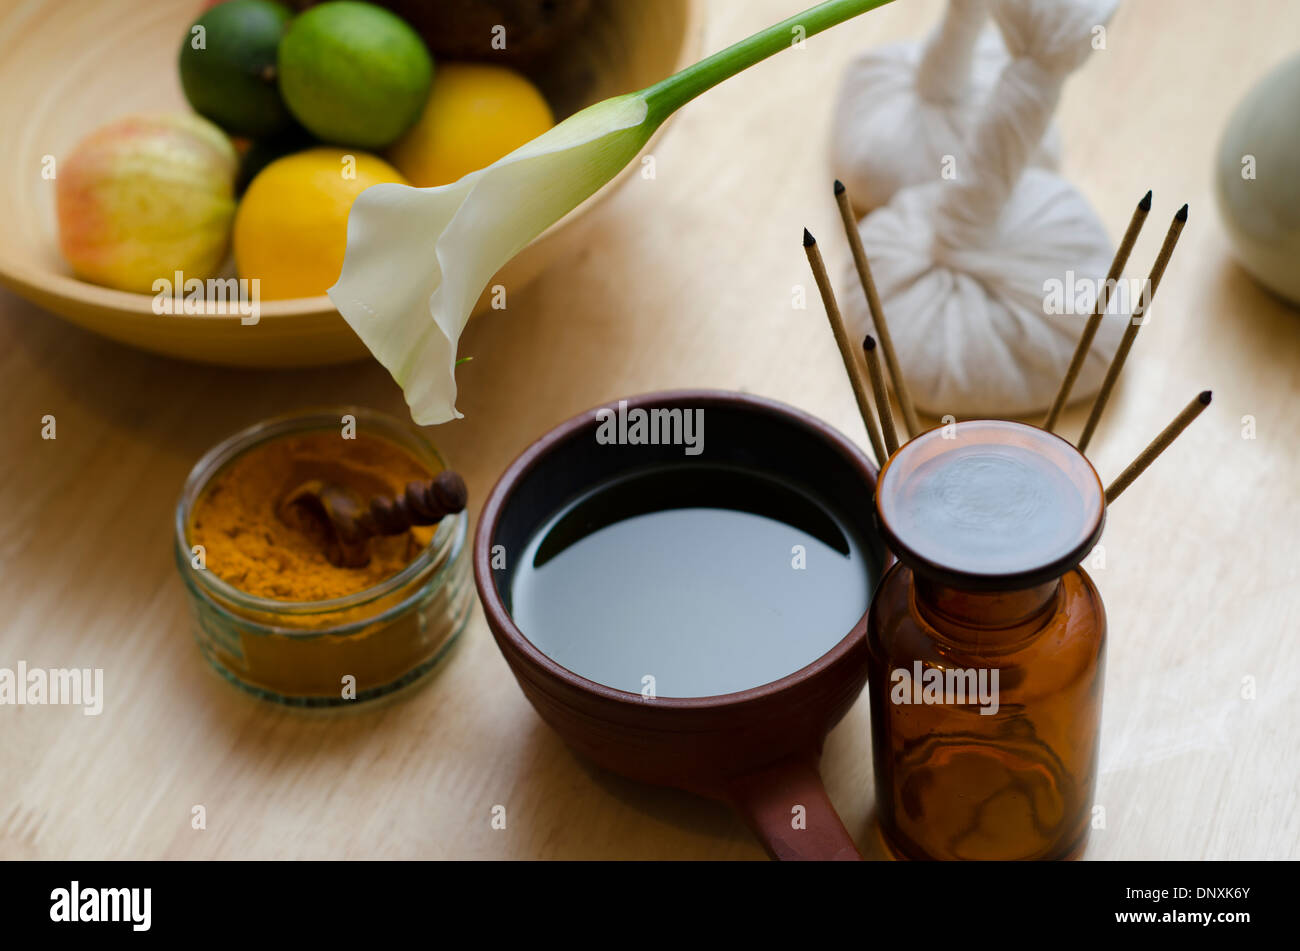 A countertop arrangement of ayurvedic turmeric spice, oil and massaging tools and an exotic flower used in Ayurveda massage. Stock Photo